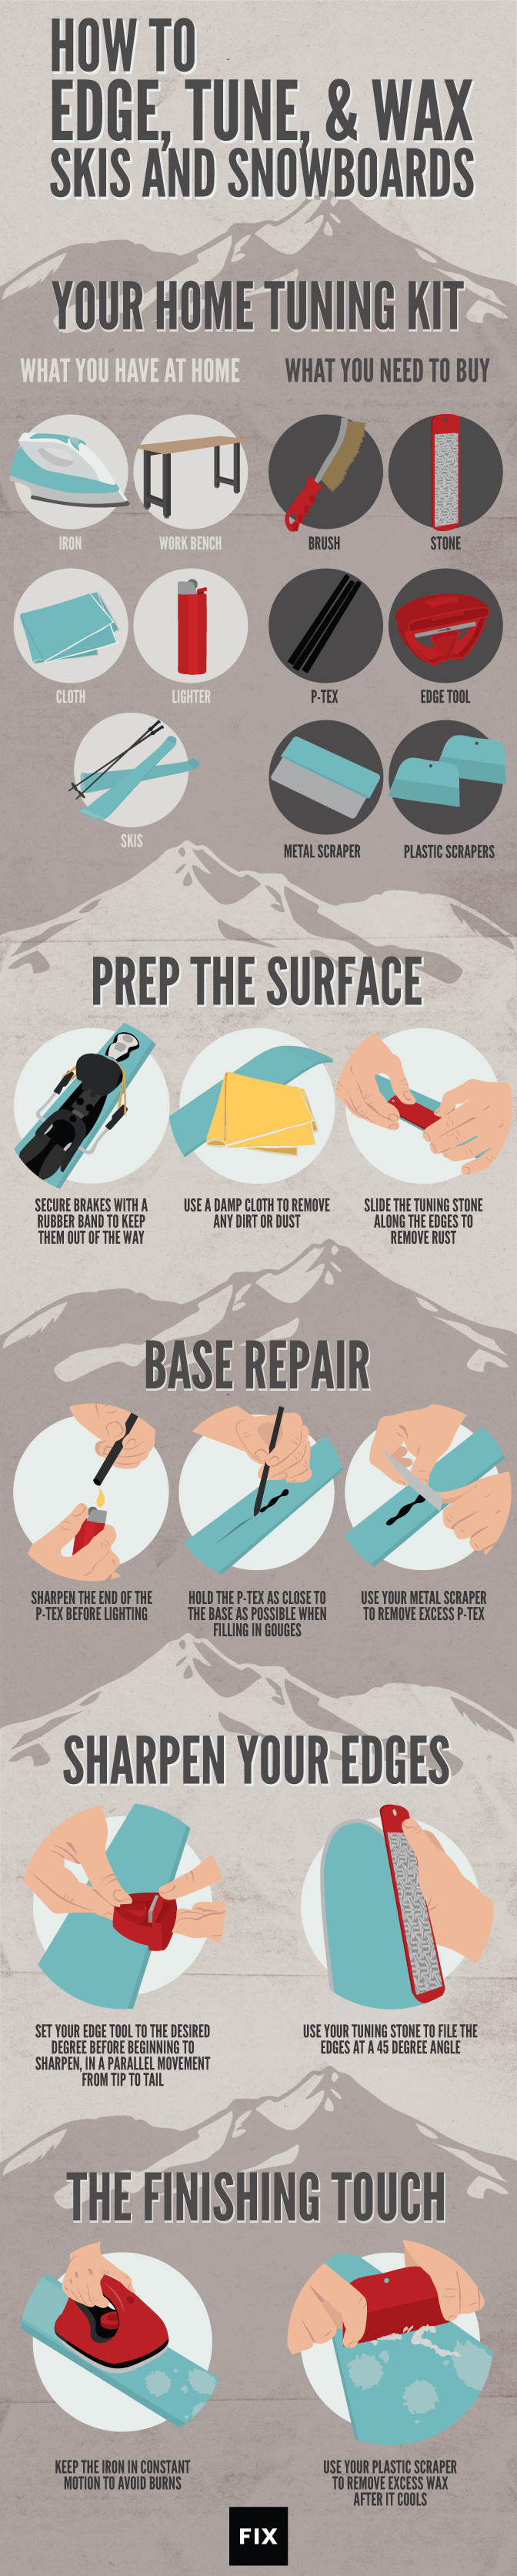 How to Wax a Snowboard - Snowboard Gear Tips 